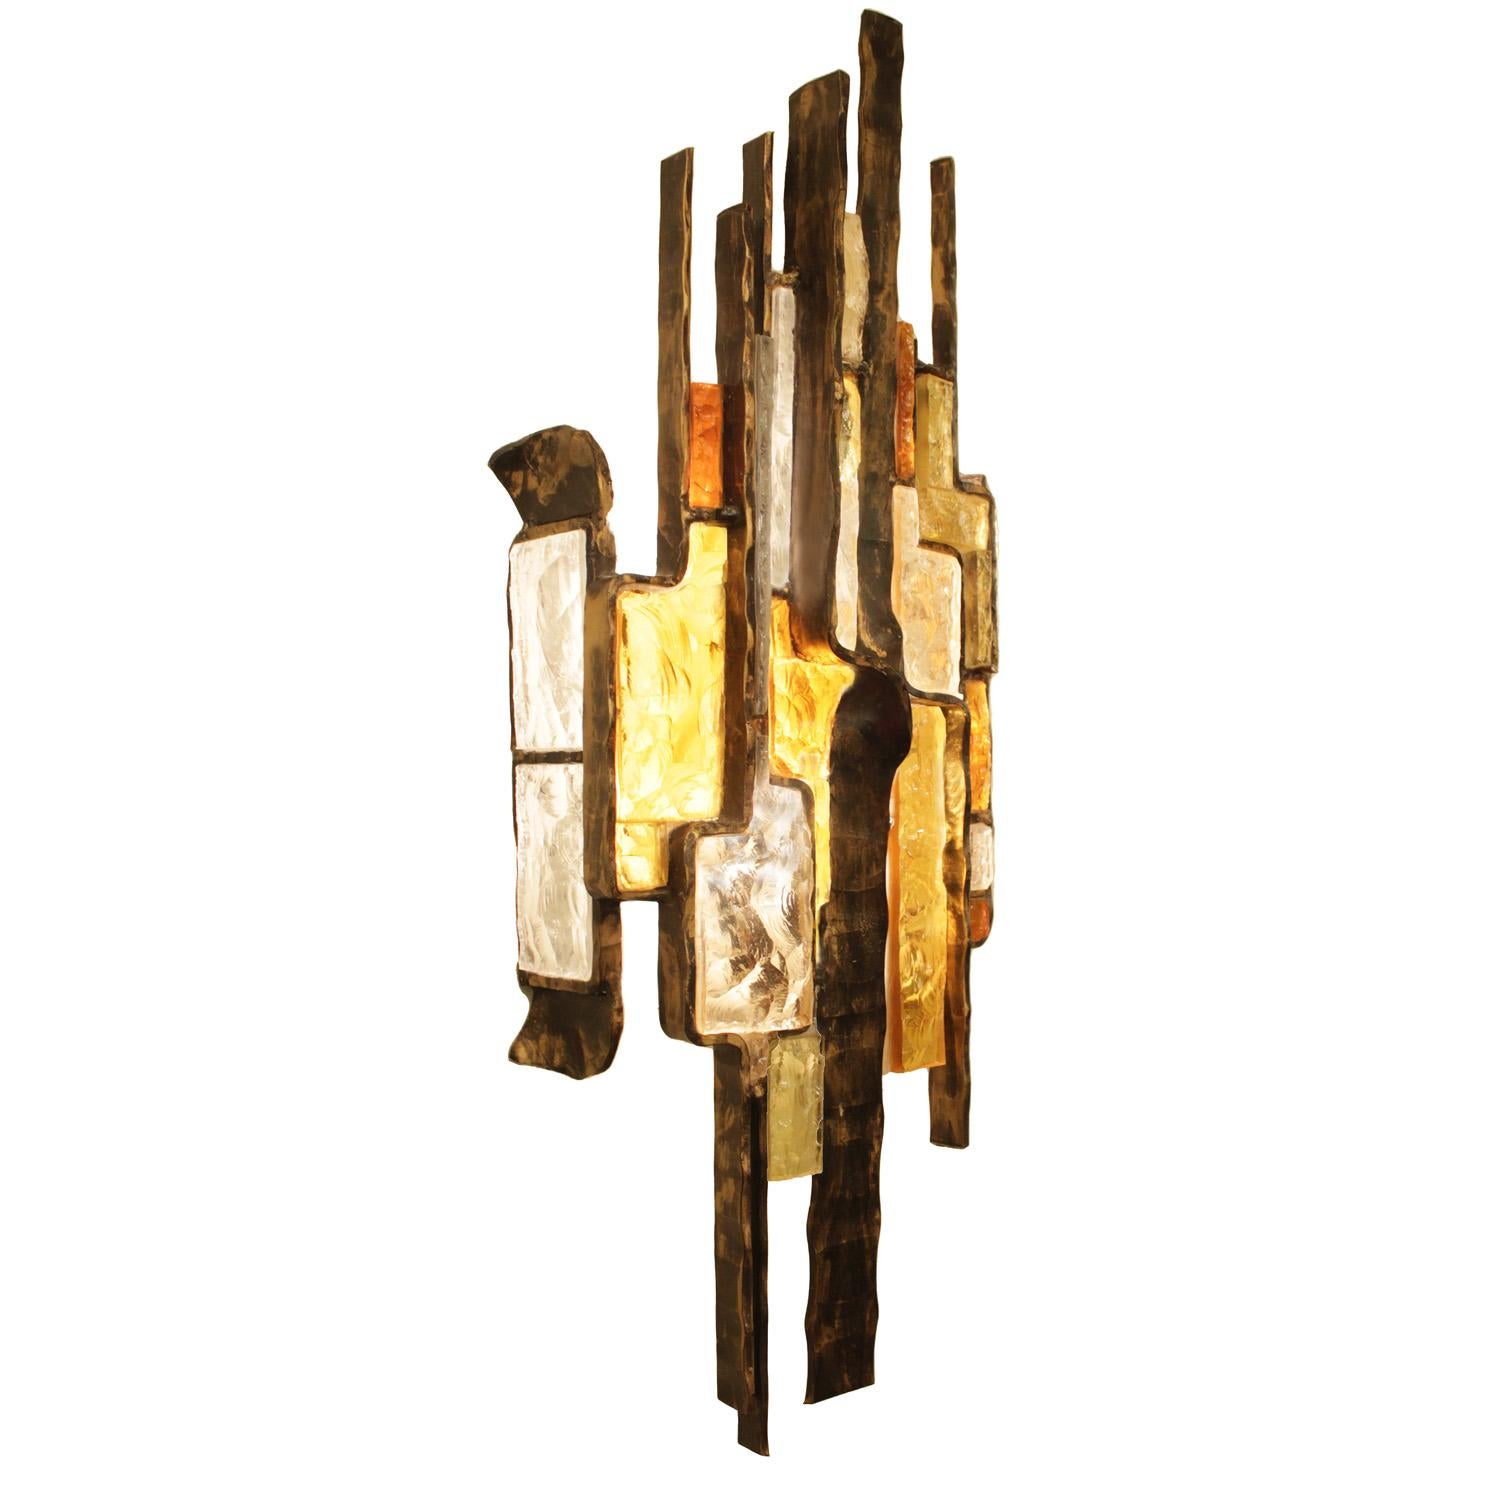 Italian Albano Poli Brutalist Murano Glass and Iron Sconce 1960s ( 6 Available) For Sale